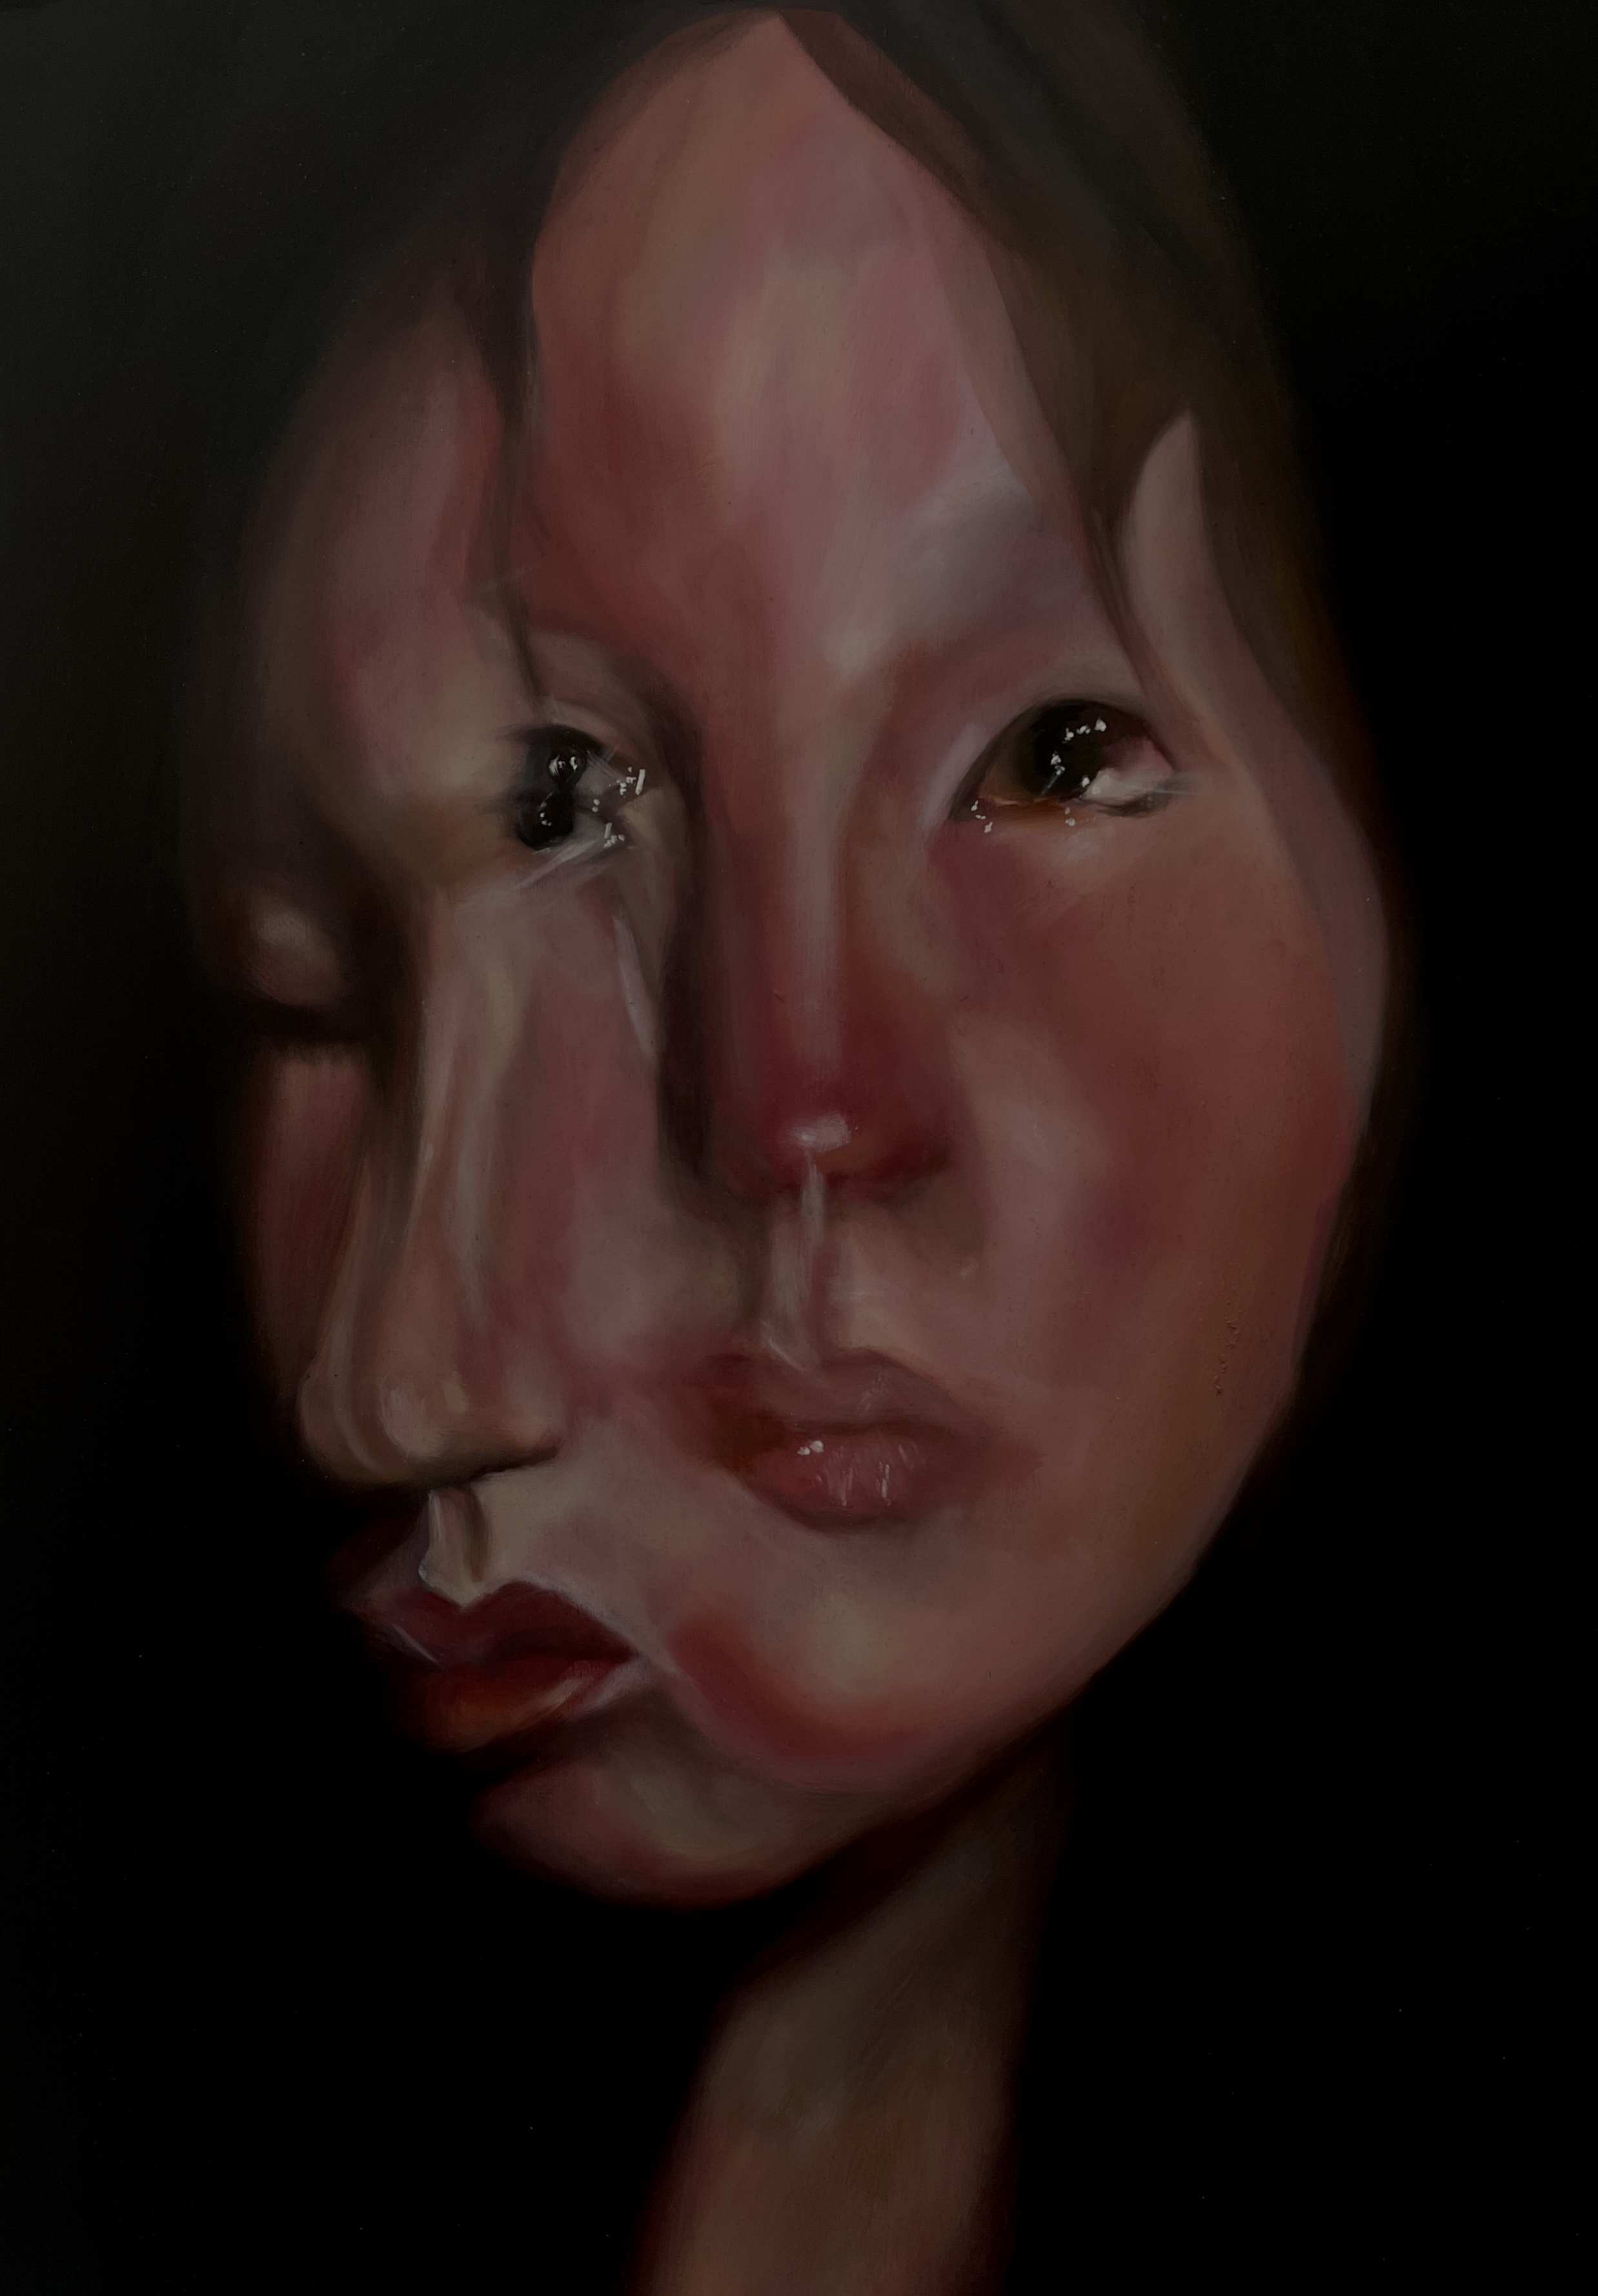 Fine Art work by Beth Mack showing a Painting of a face that has been distorted, one half looking up another looking down to the side on a black background.